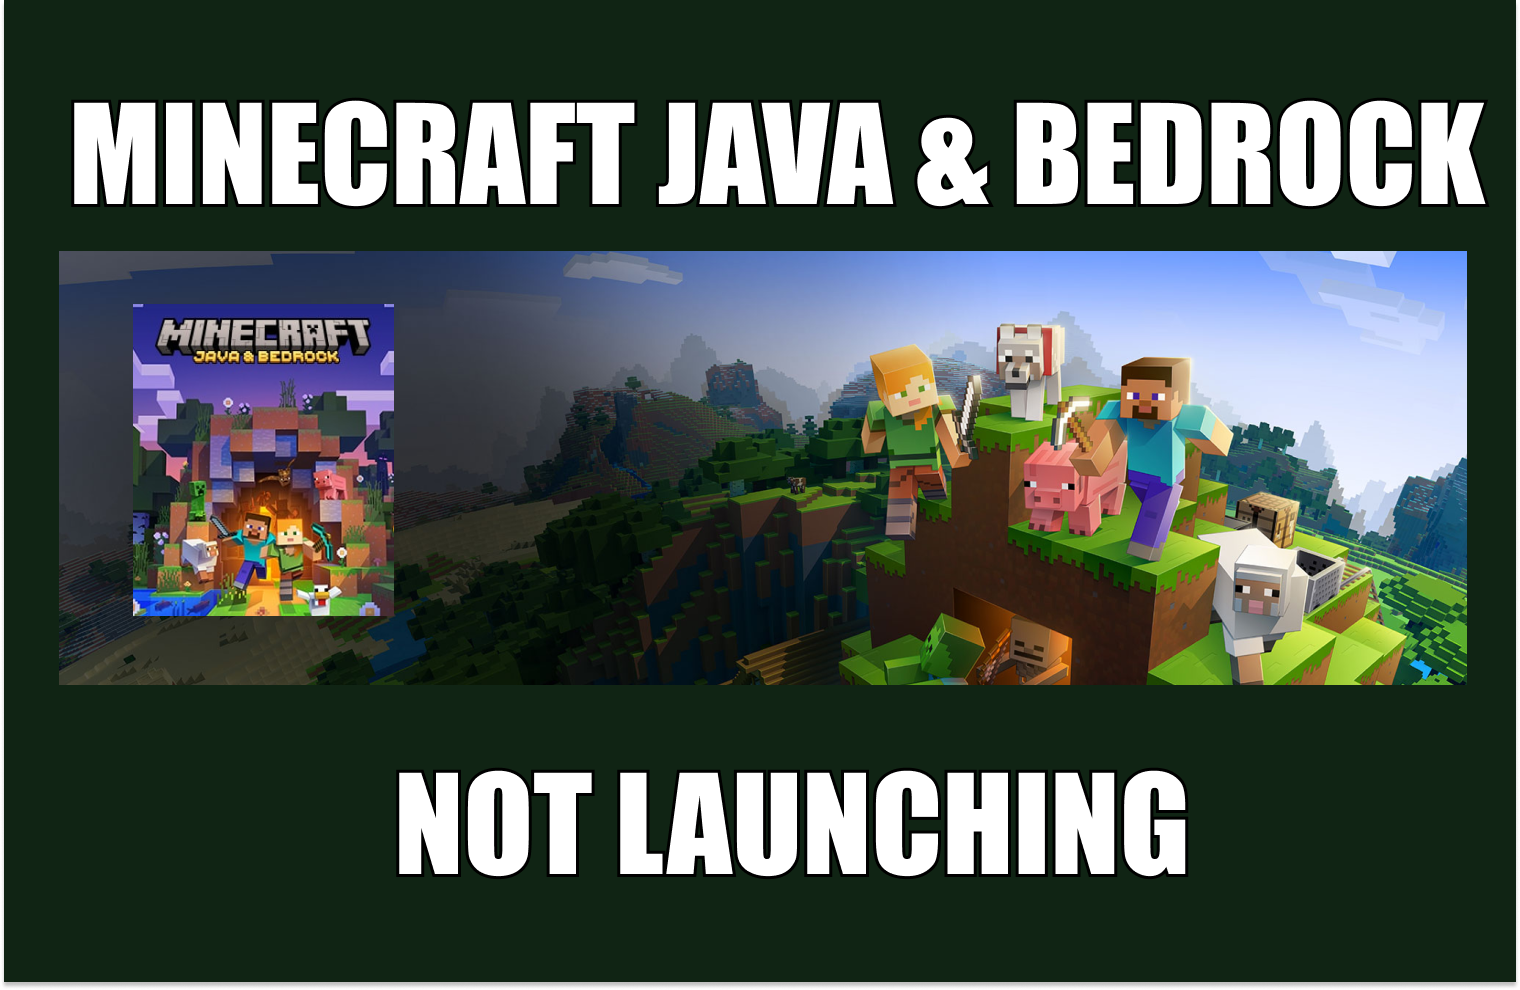 How To Switch Between Minecraft Java And Bedrock For FREE! 